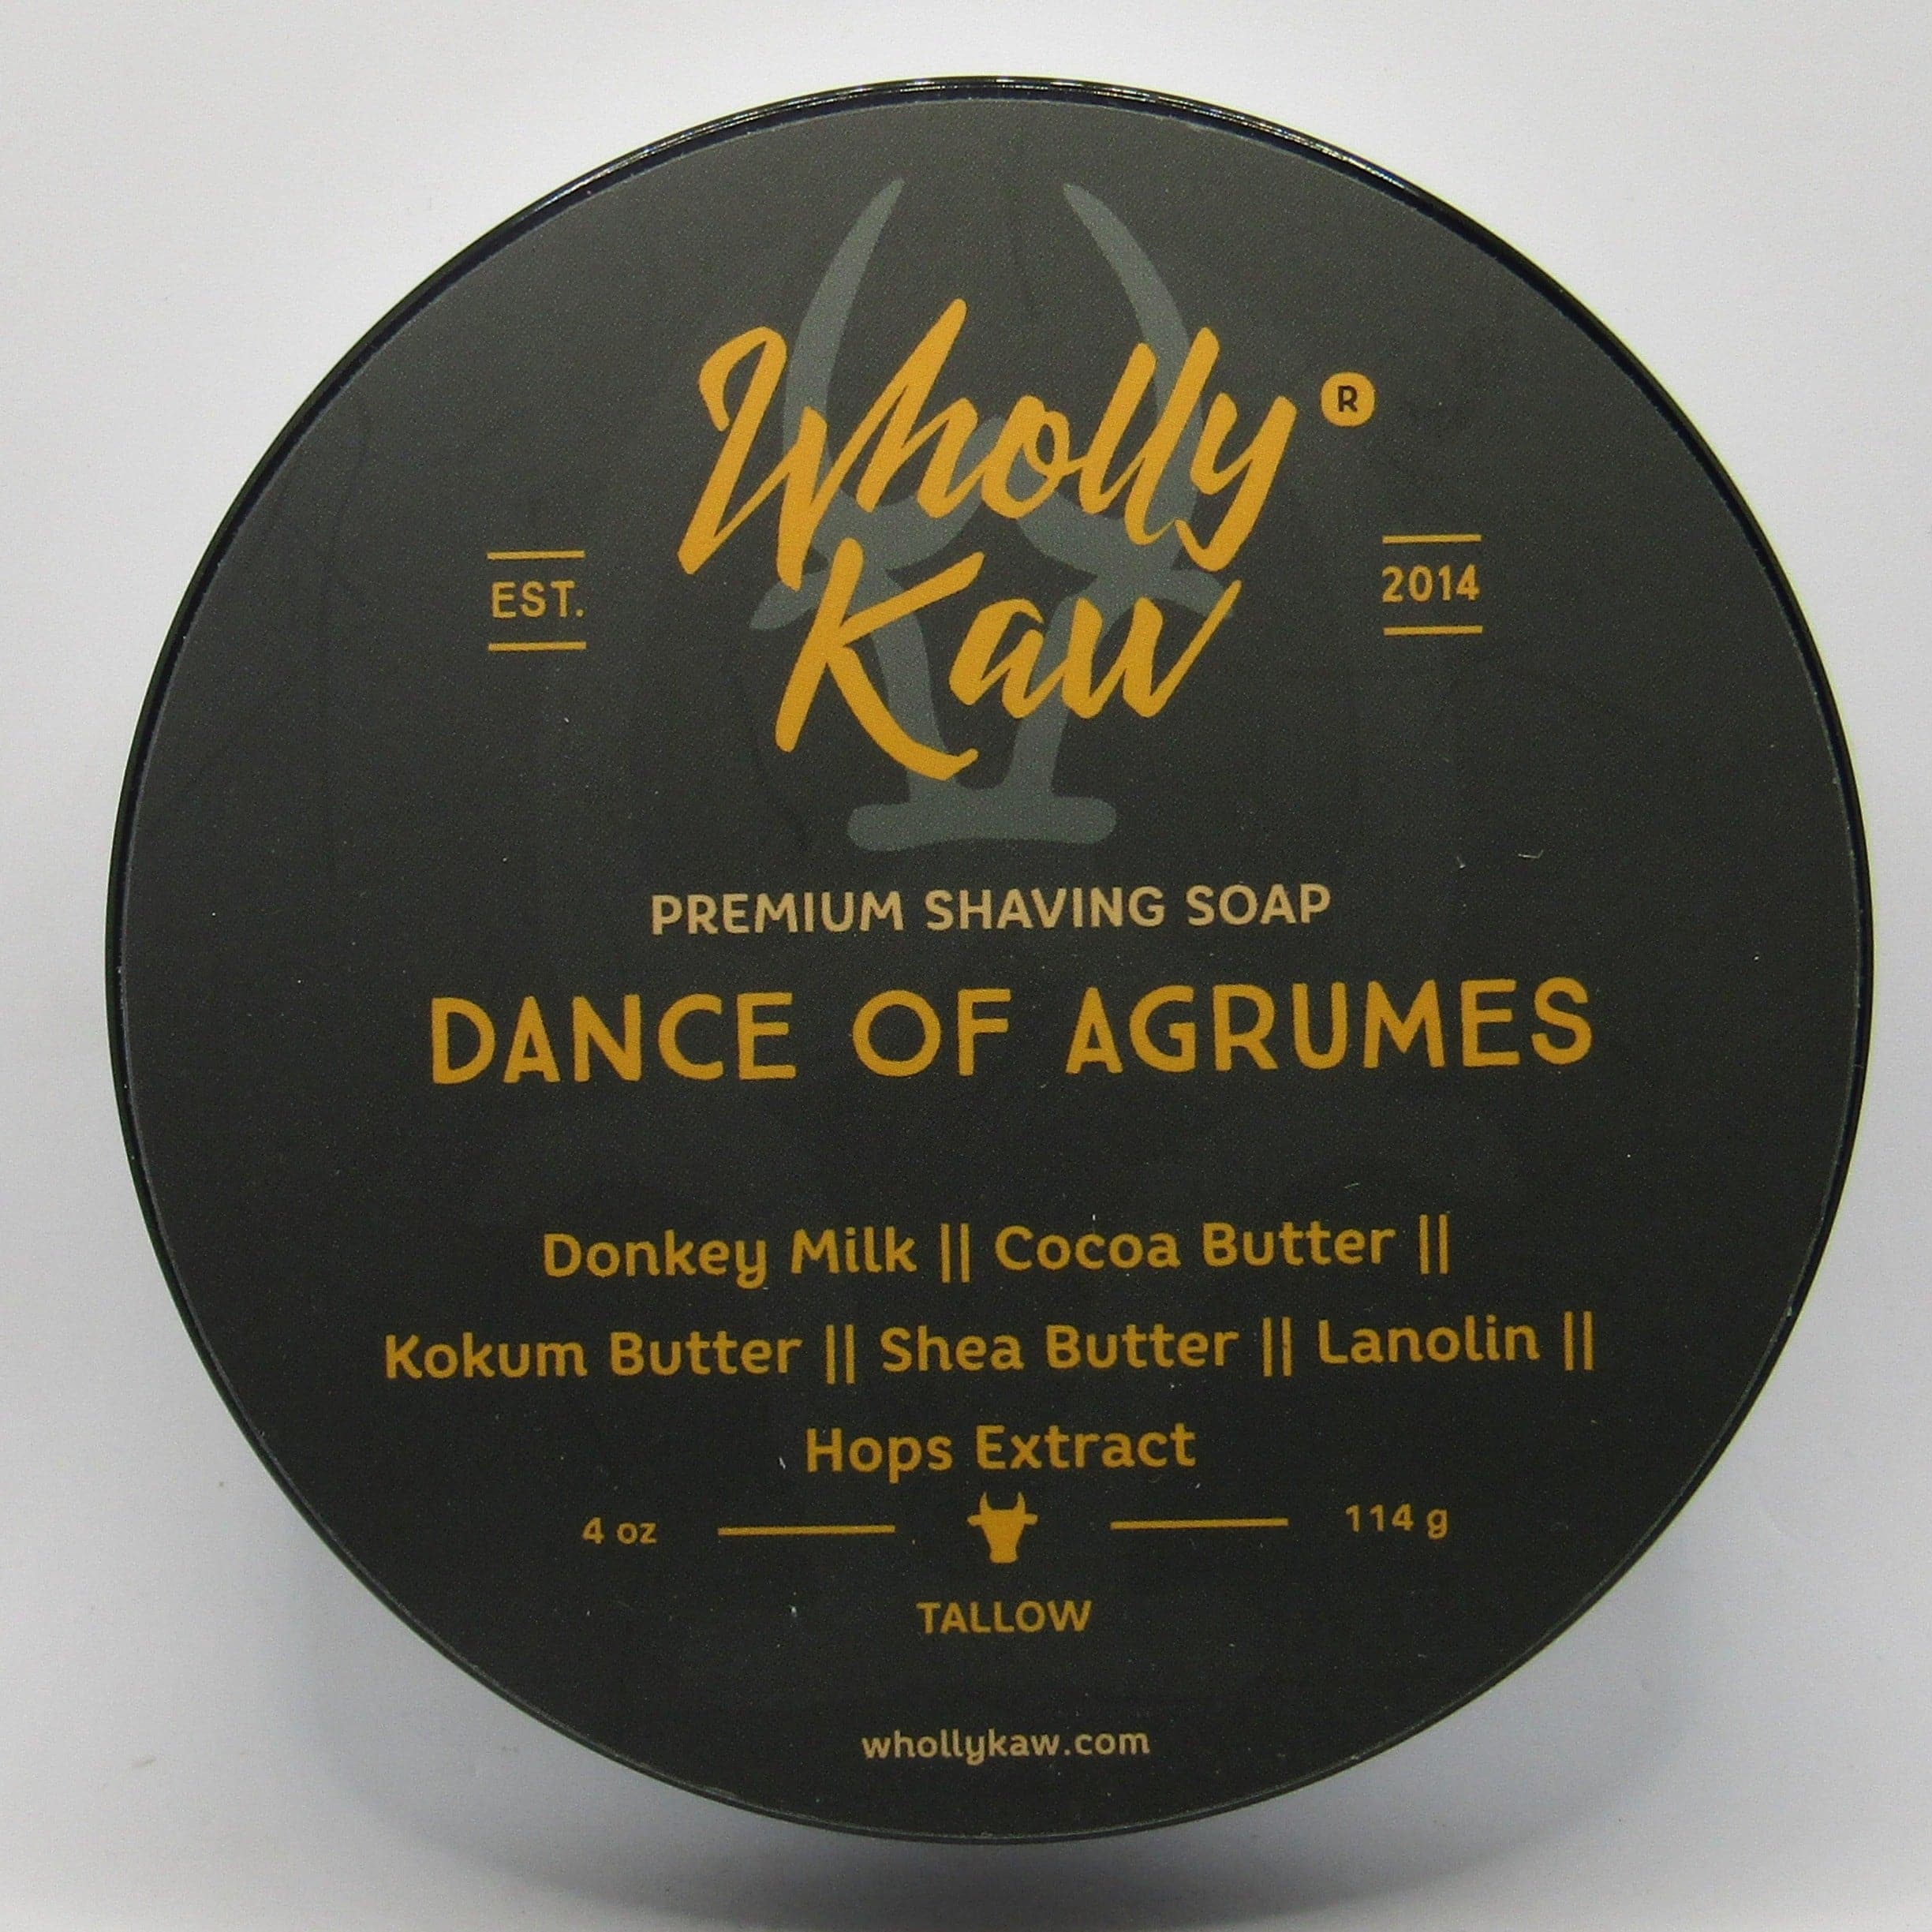 Dance of Agrumes (Tallow) Shaving Soap - by Wholly Kaw (Pre-Owned)